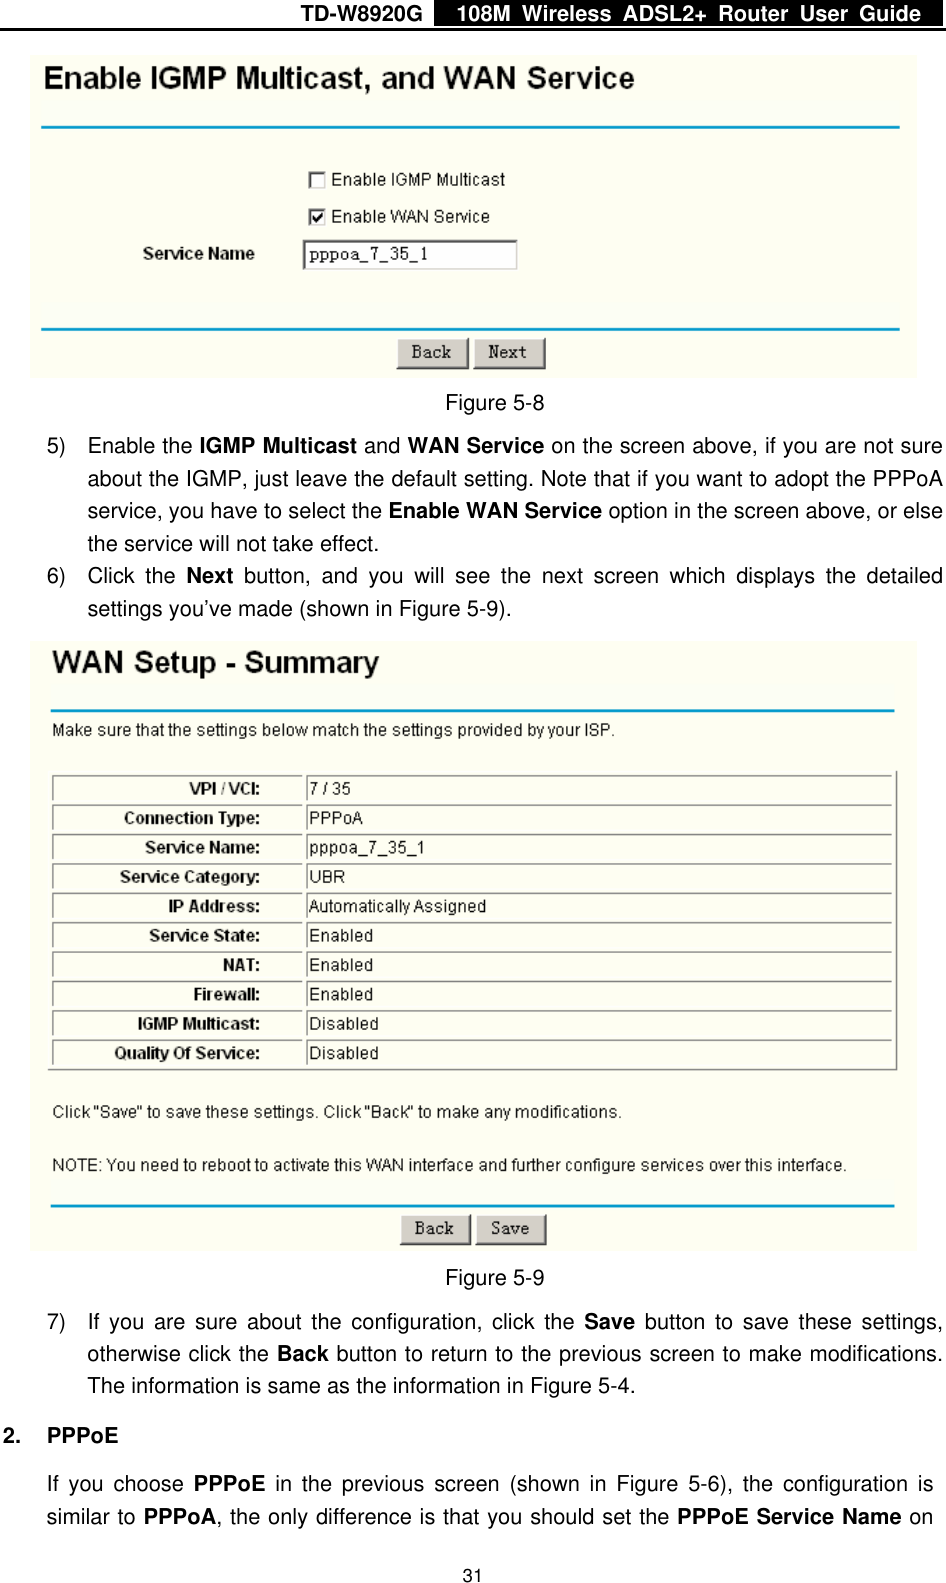 TD-W8920G    108M Wireless ADSL2+ Router User Guide    31 Figure 5-8 5) Enable the IGMP Multicast and WAN Service on the screen above, if you are not sure about the IGMP, just leave the default setting. Note that if you want to adopt the PPPoA service, you have to select the Enable WAN Service option in the screen above, or else the service will not take effect. 6) Click the Next button, and you will see the next screen which displays the detailed settings you’ve made (shown in Figure 5-9).  Figure 5-9 7)  If you are sure about the configuration, click the Save button to save these settings, otherwise click the Back button to return to the previous screen to make modifications. The information is same as the information in Figure 5-4. 2. PPPoE If you choose PPPoE in the previous screen (shown in Figure 5-6), the configuration is similar to PPPoA, the only difference is that you should set the PPPoE Service Name on 